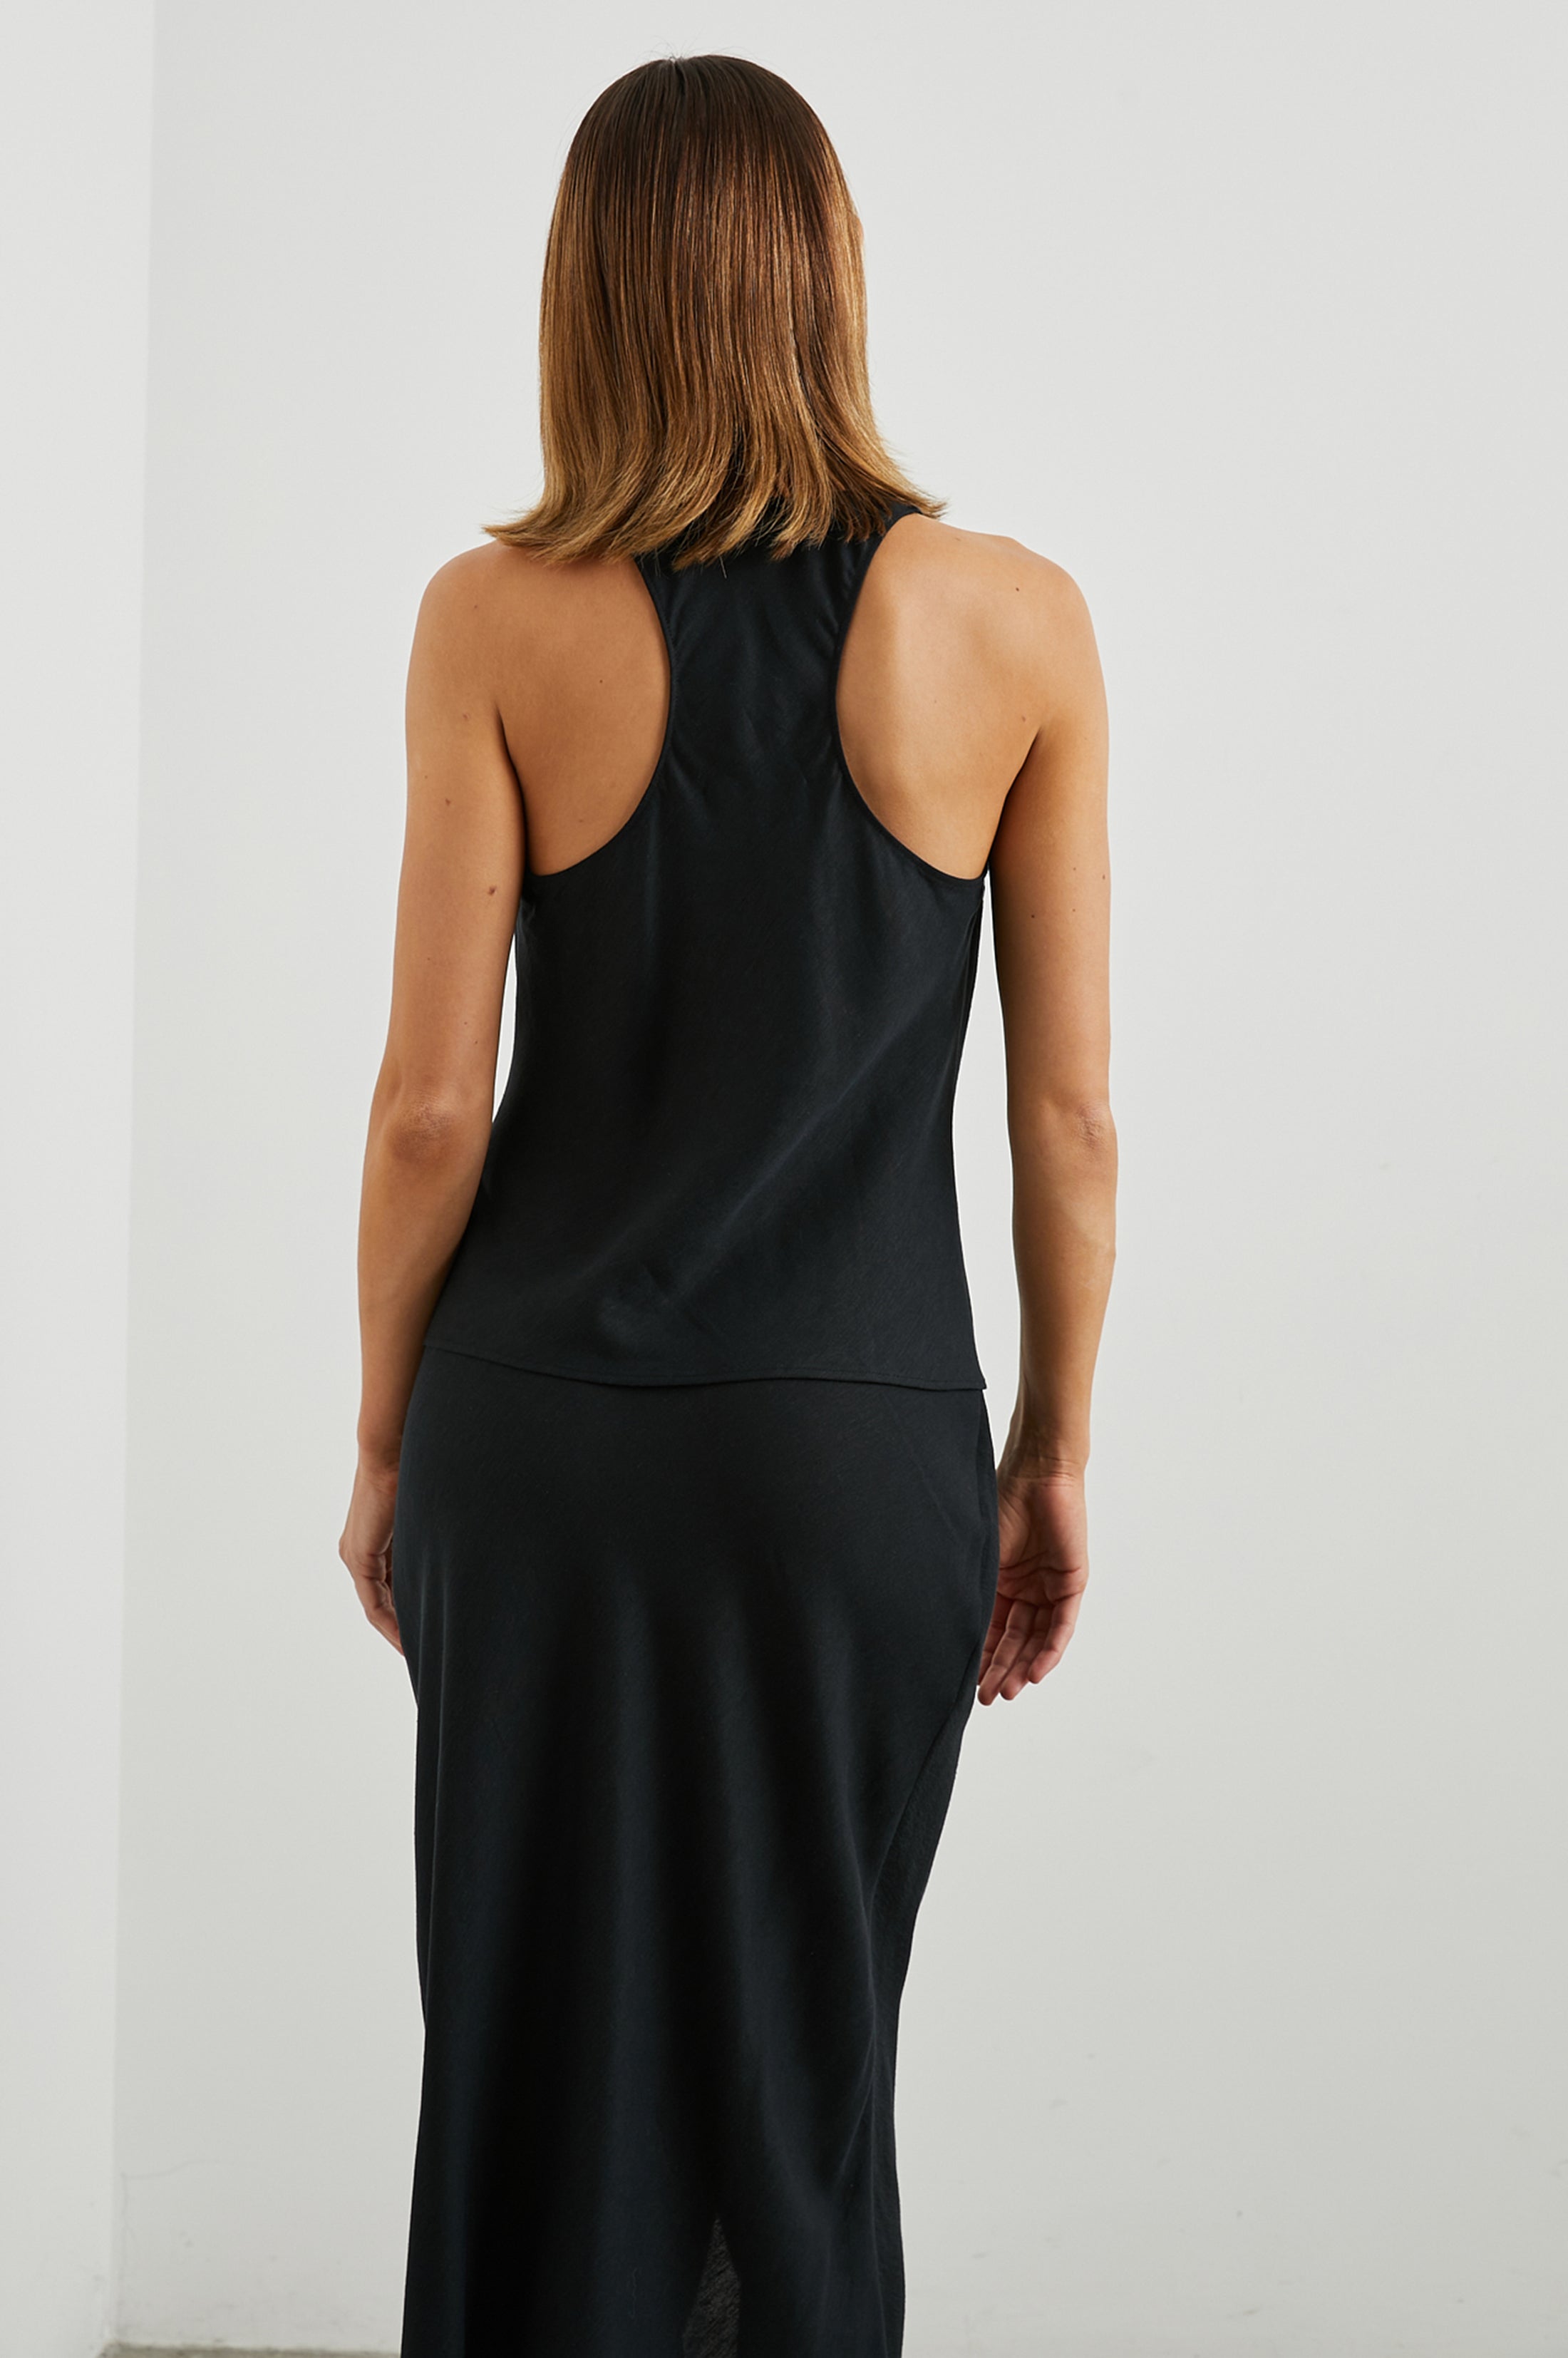 Sleeveless black top with racer back rear view